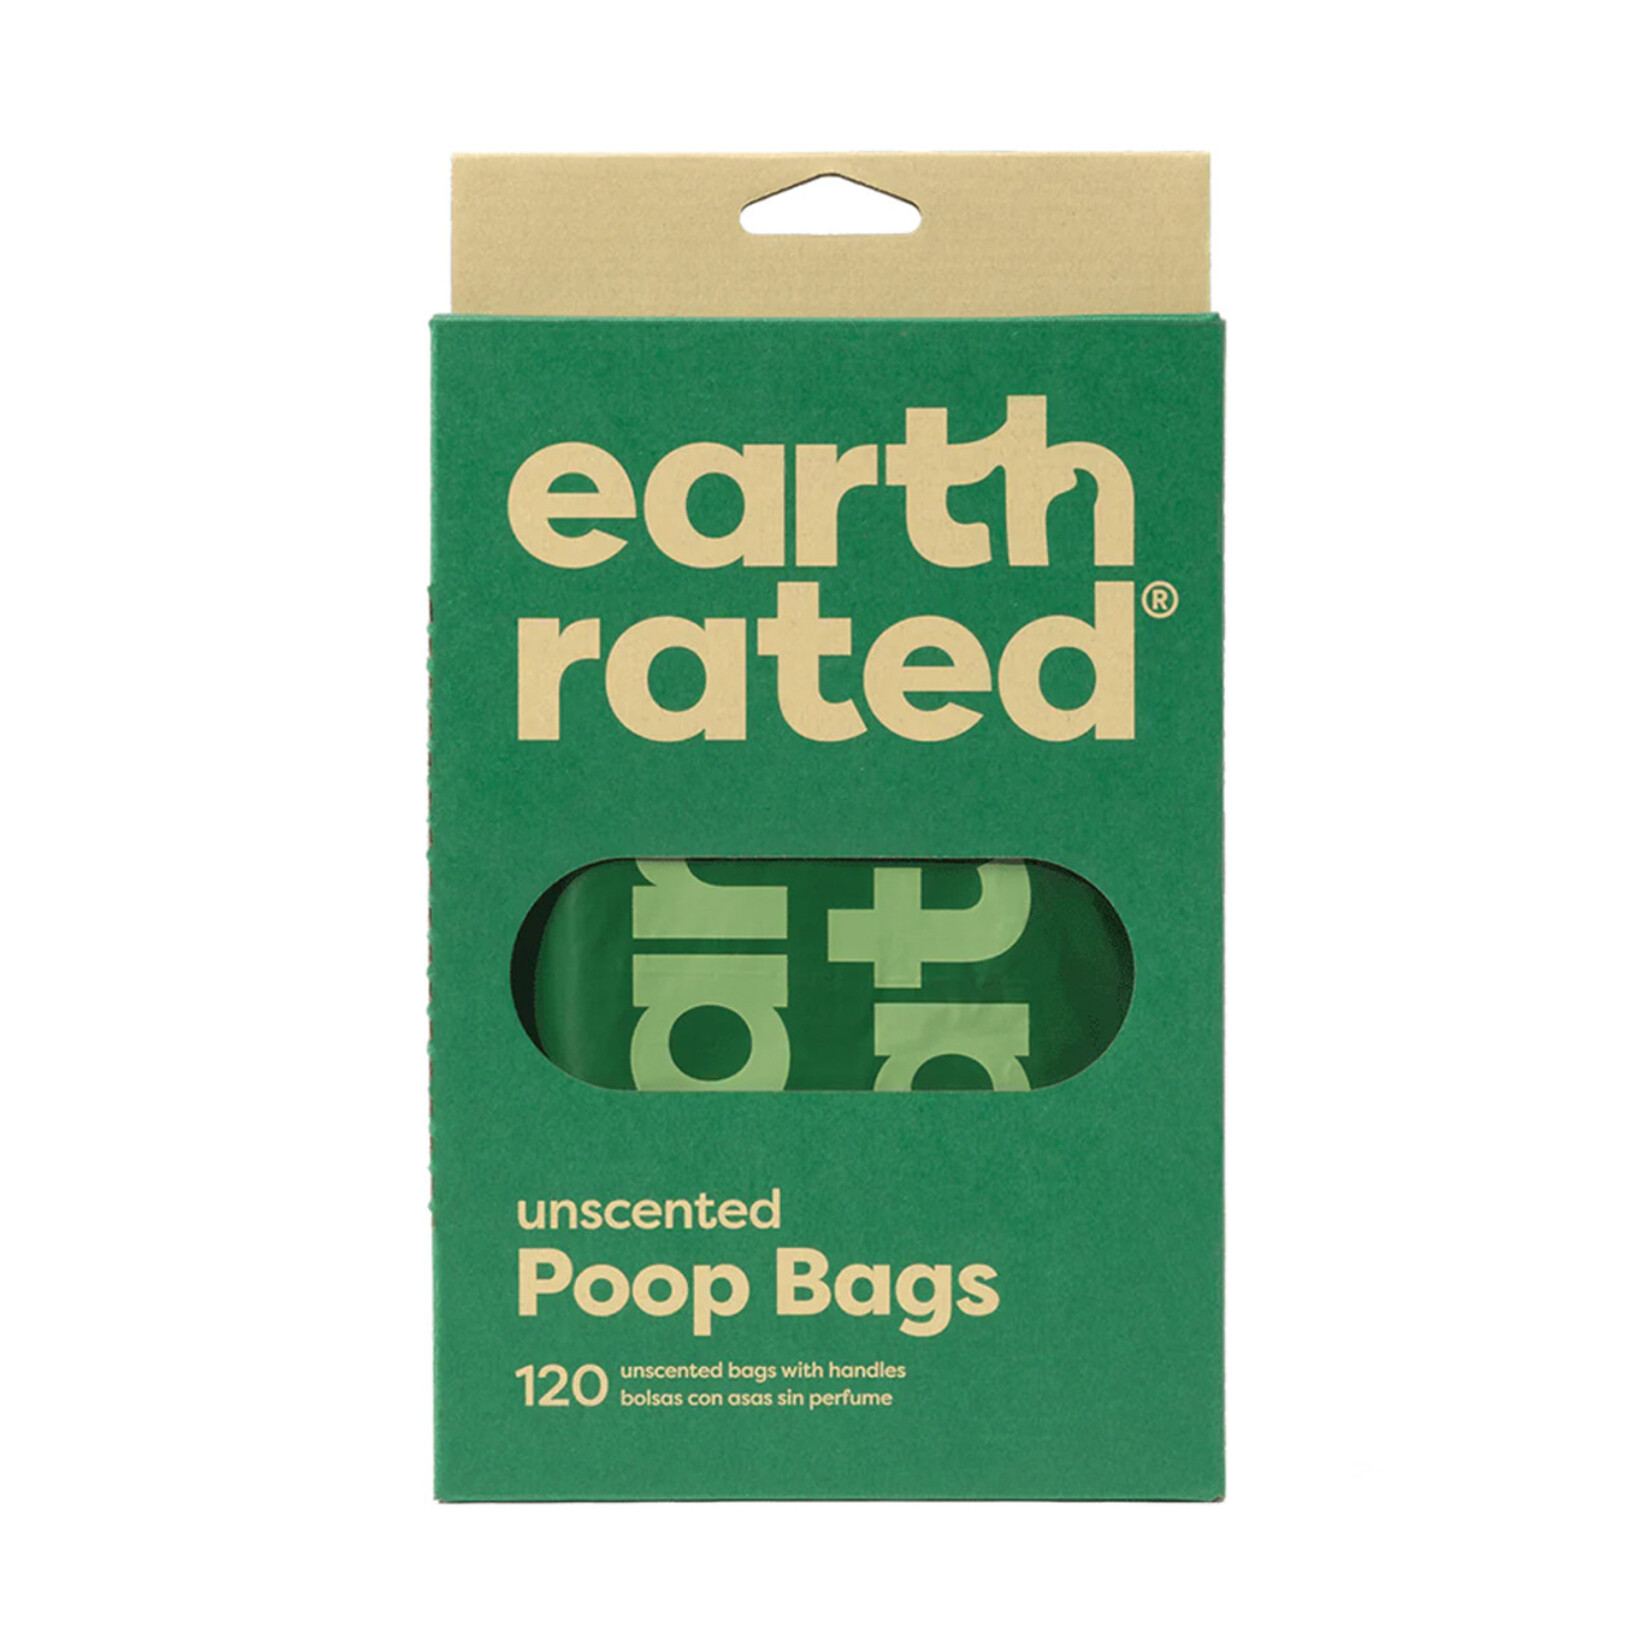 Earth Rated Earth Rated Unscented Poop Bags with Handles 120ct